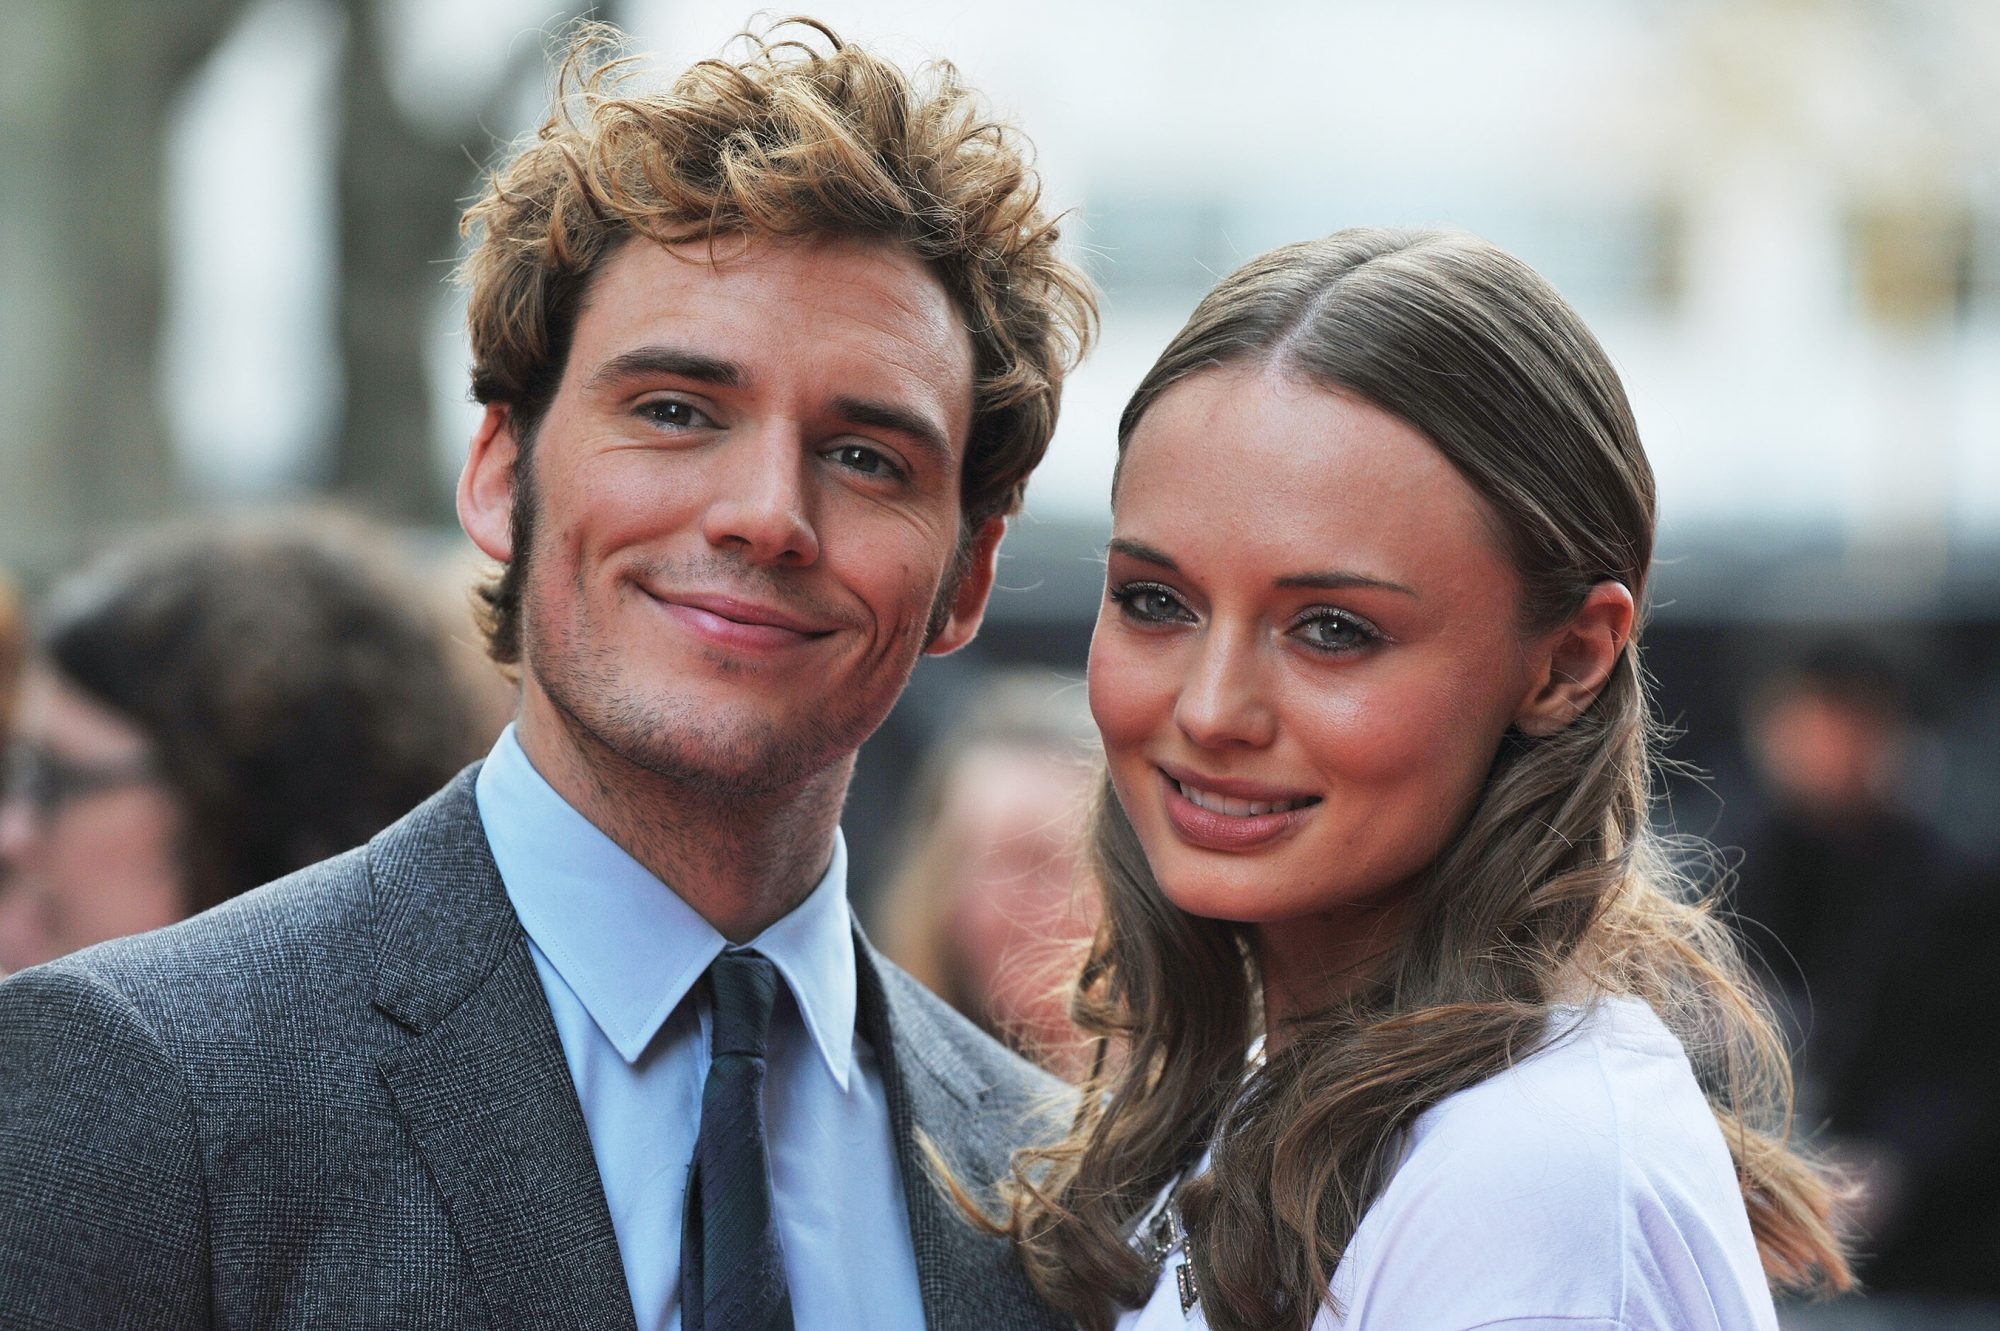 Sam Claflin: Married actress Laura Haddock in July 2013 in a private ceremony. 2000x1340 HD Wallpaper.